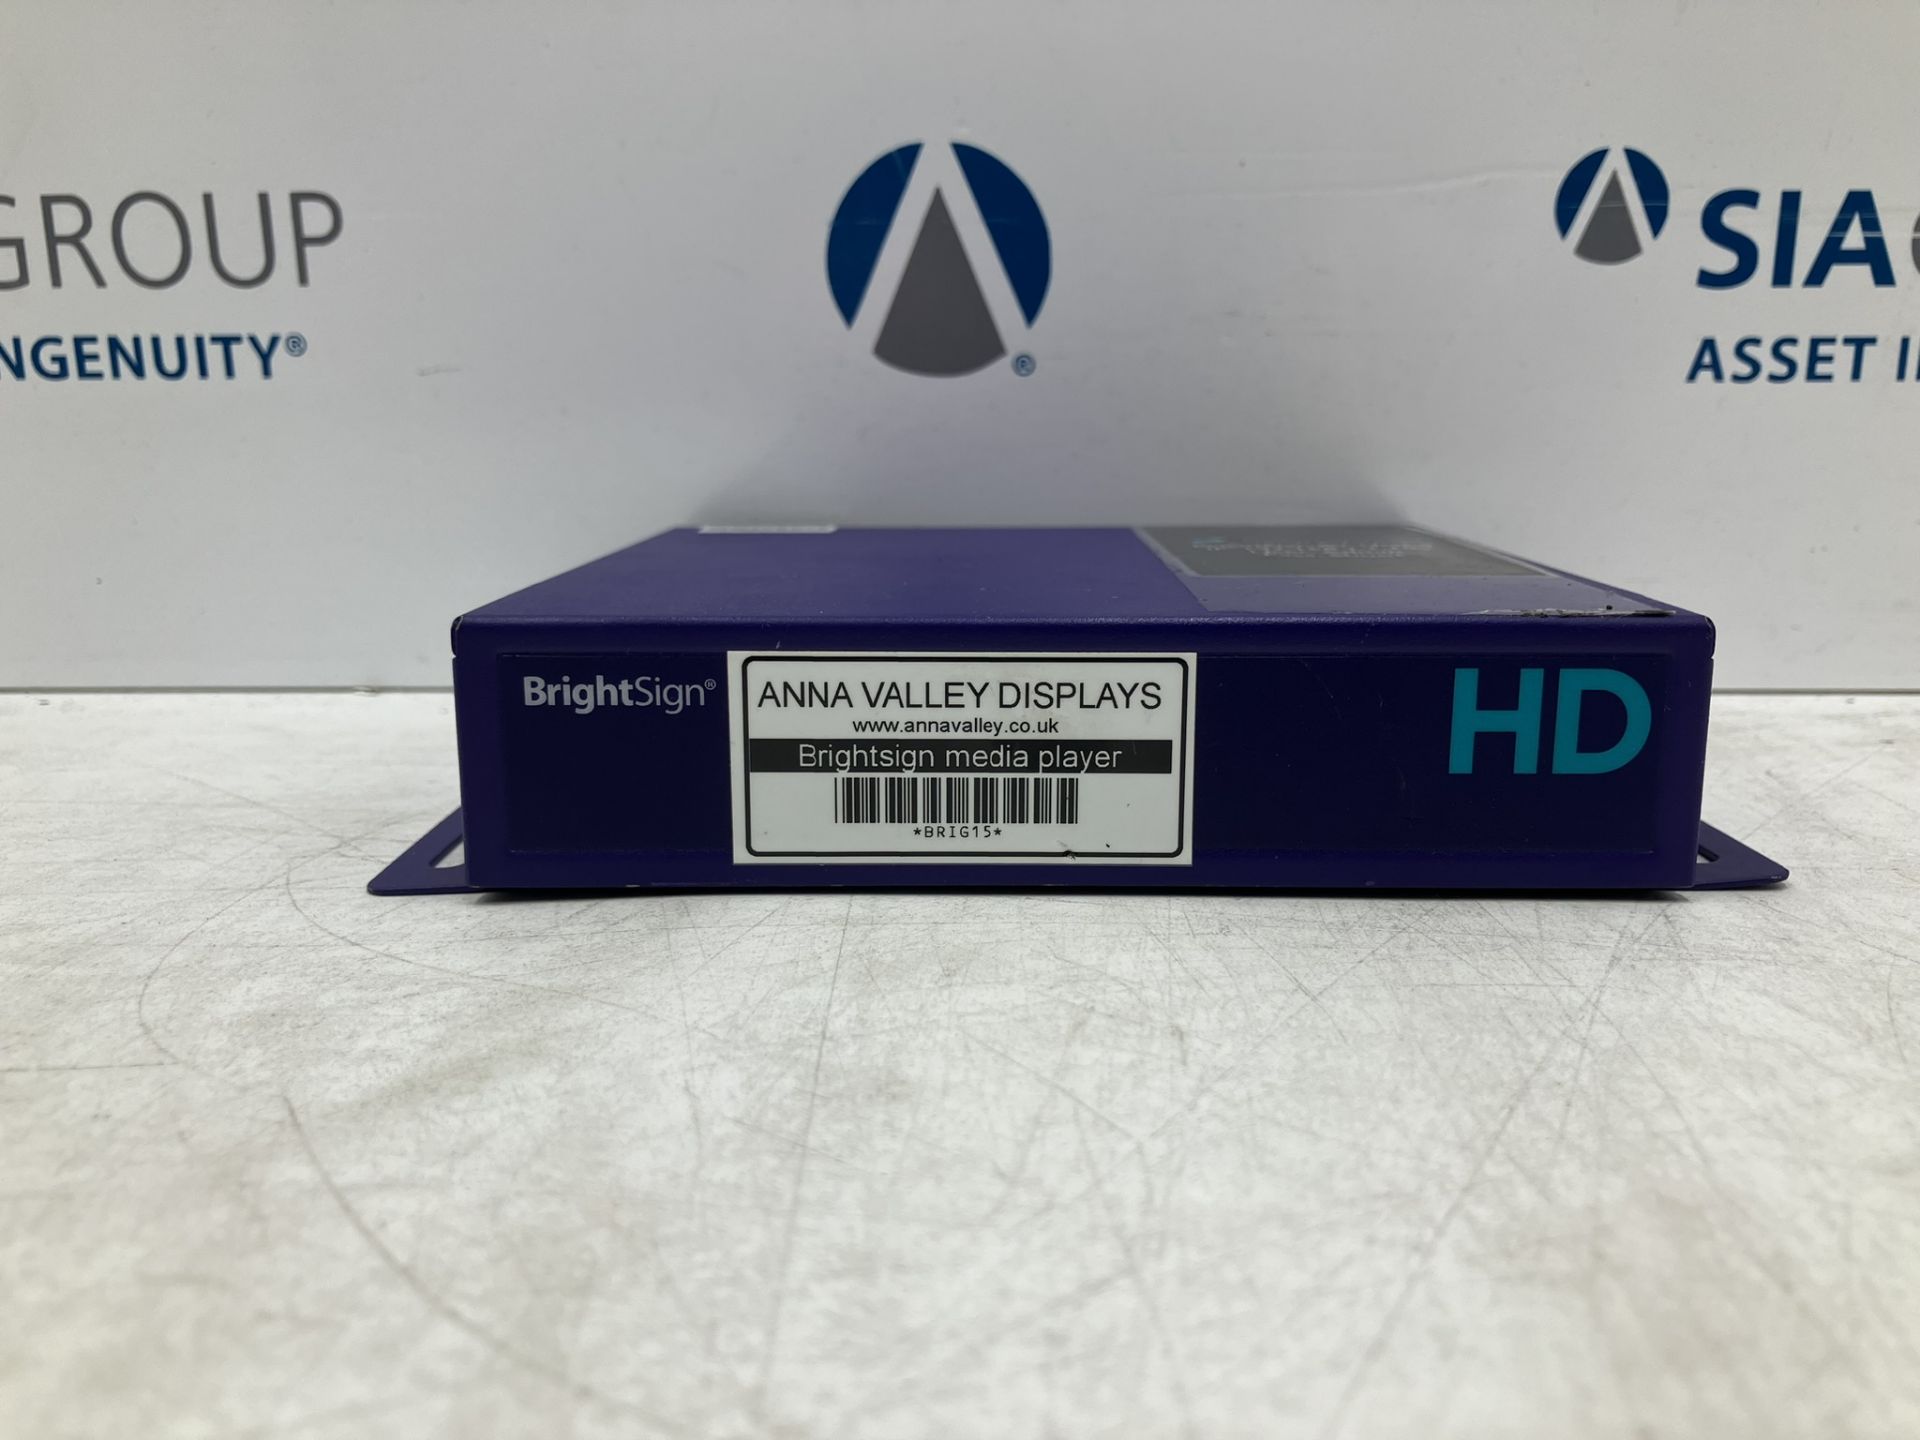 Brightsign HD - Network Media Player - Image 5 of 9